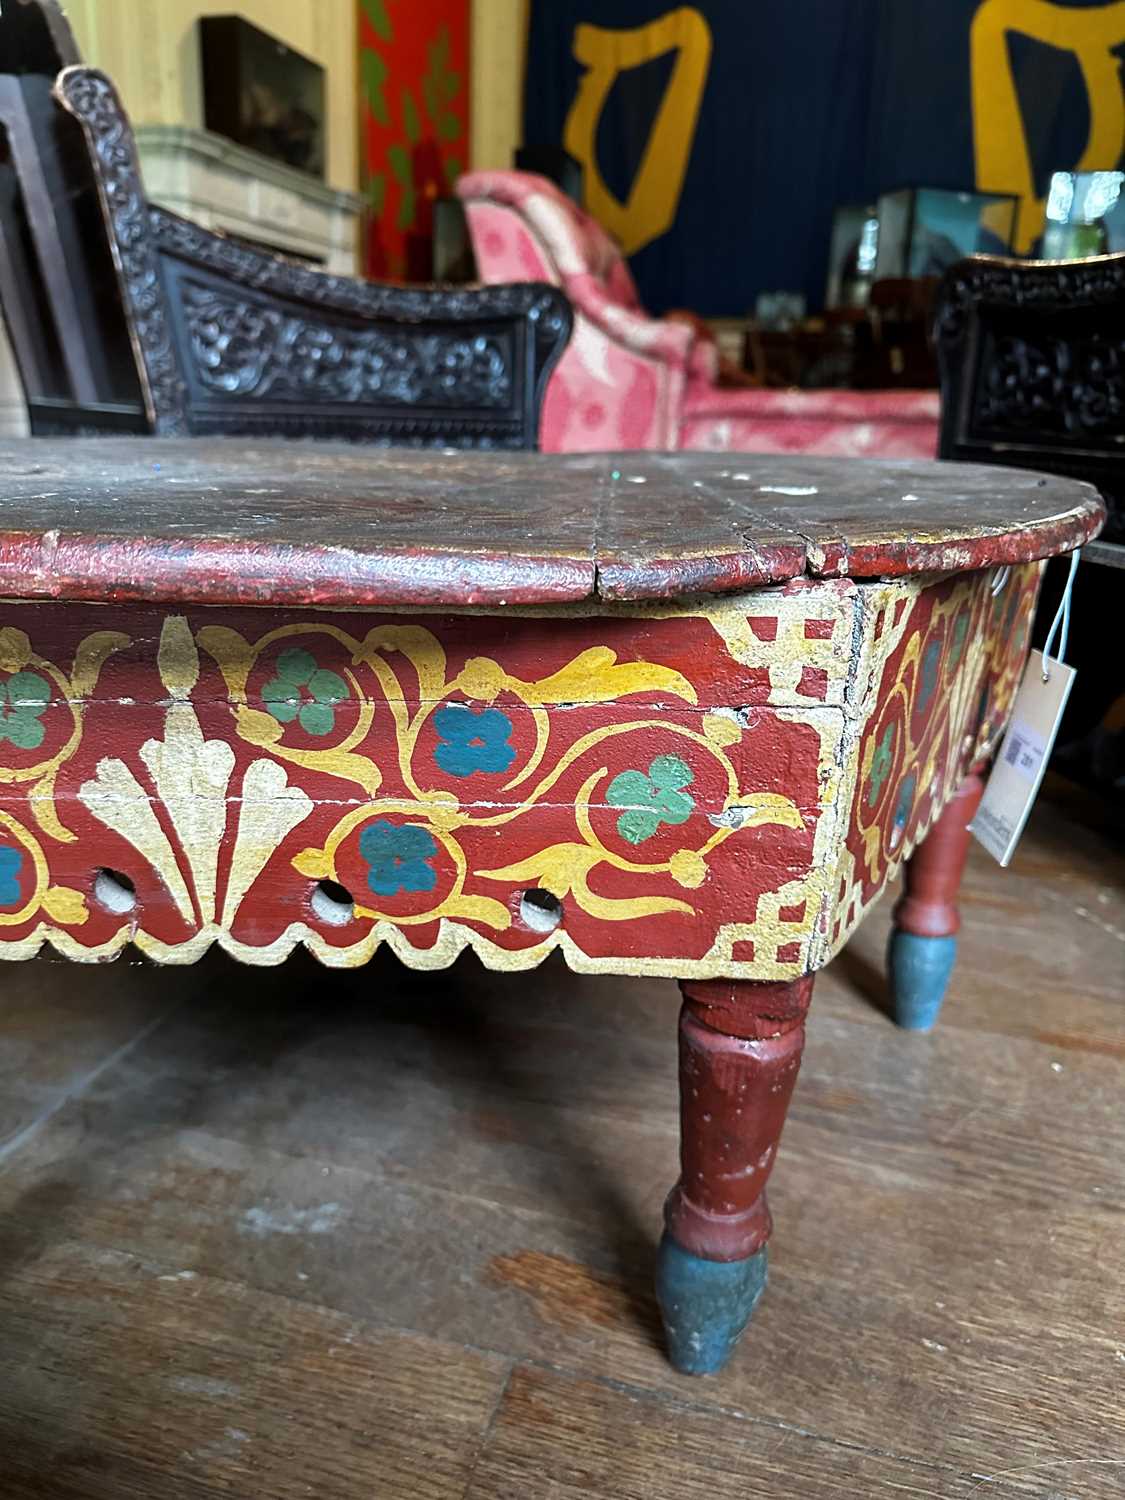 A painted table, - Image 22 of 38